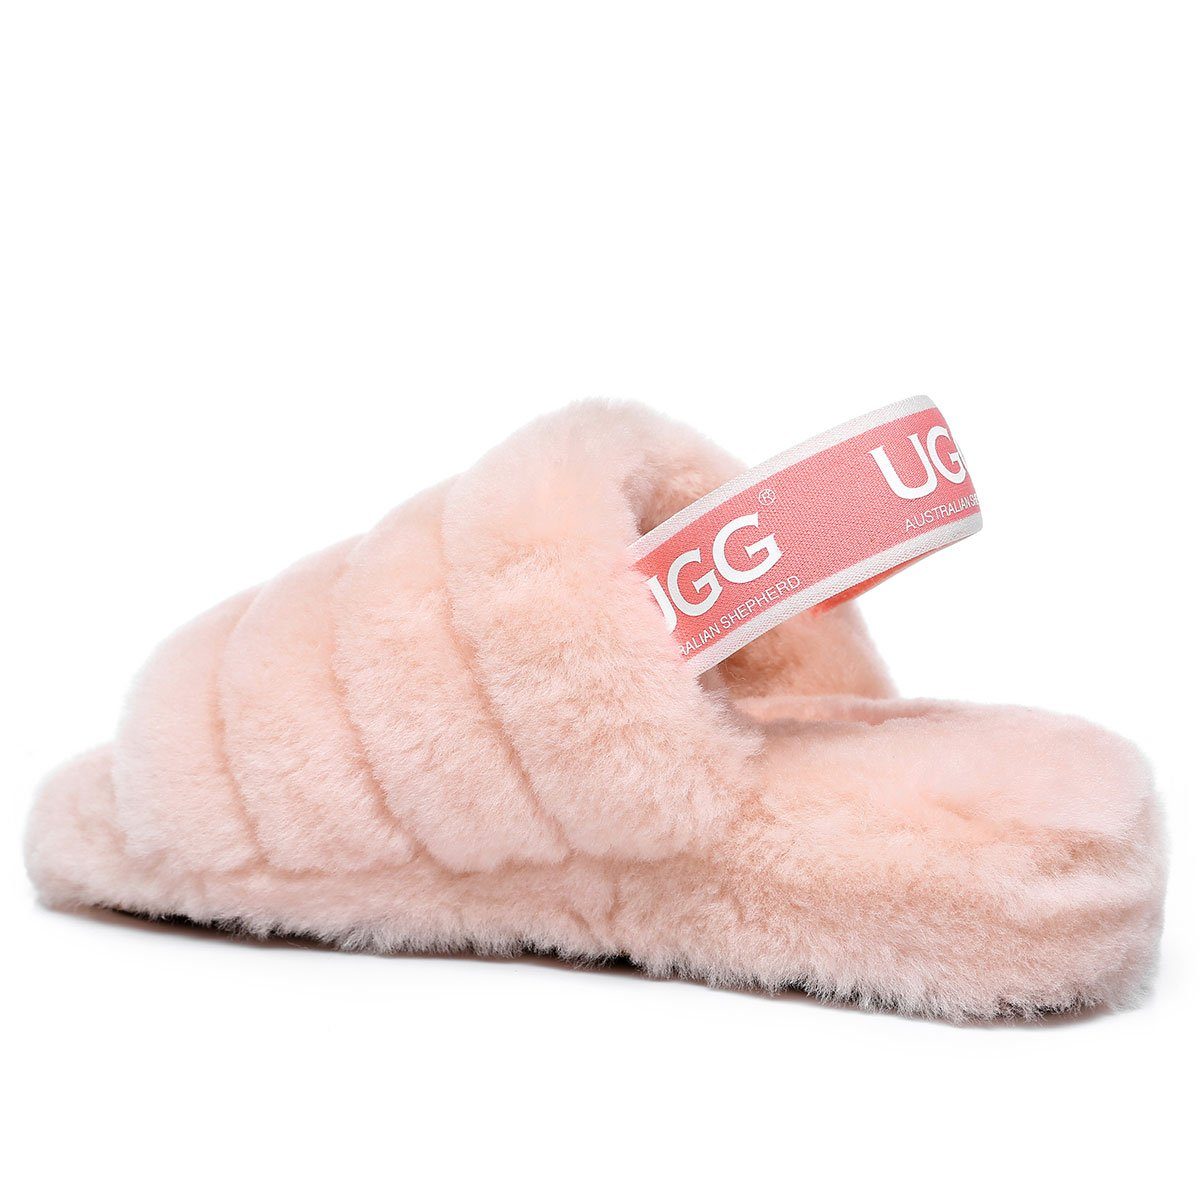 Rosa Ugg Slippers - The UGG Boots